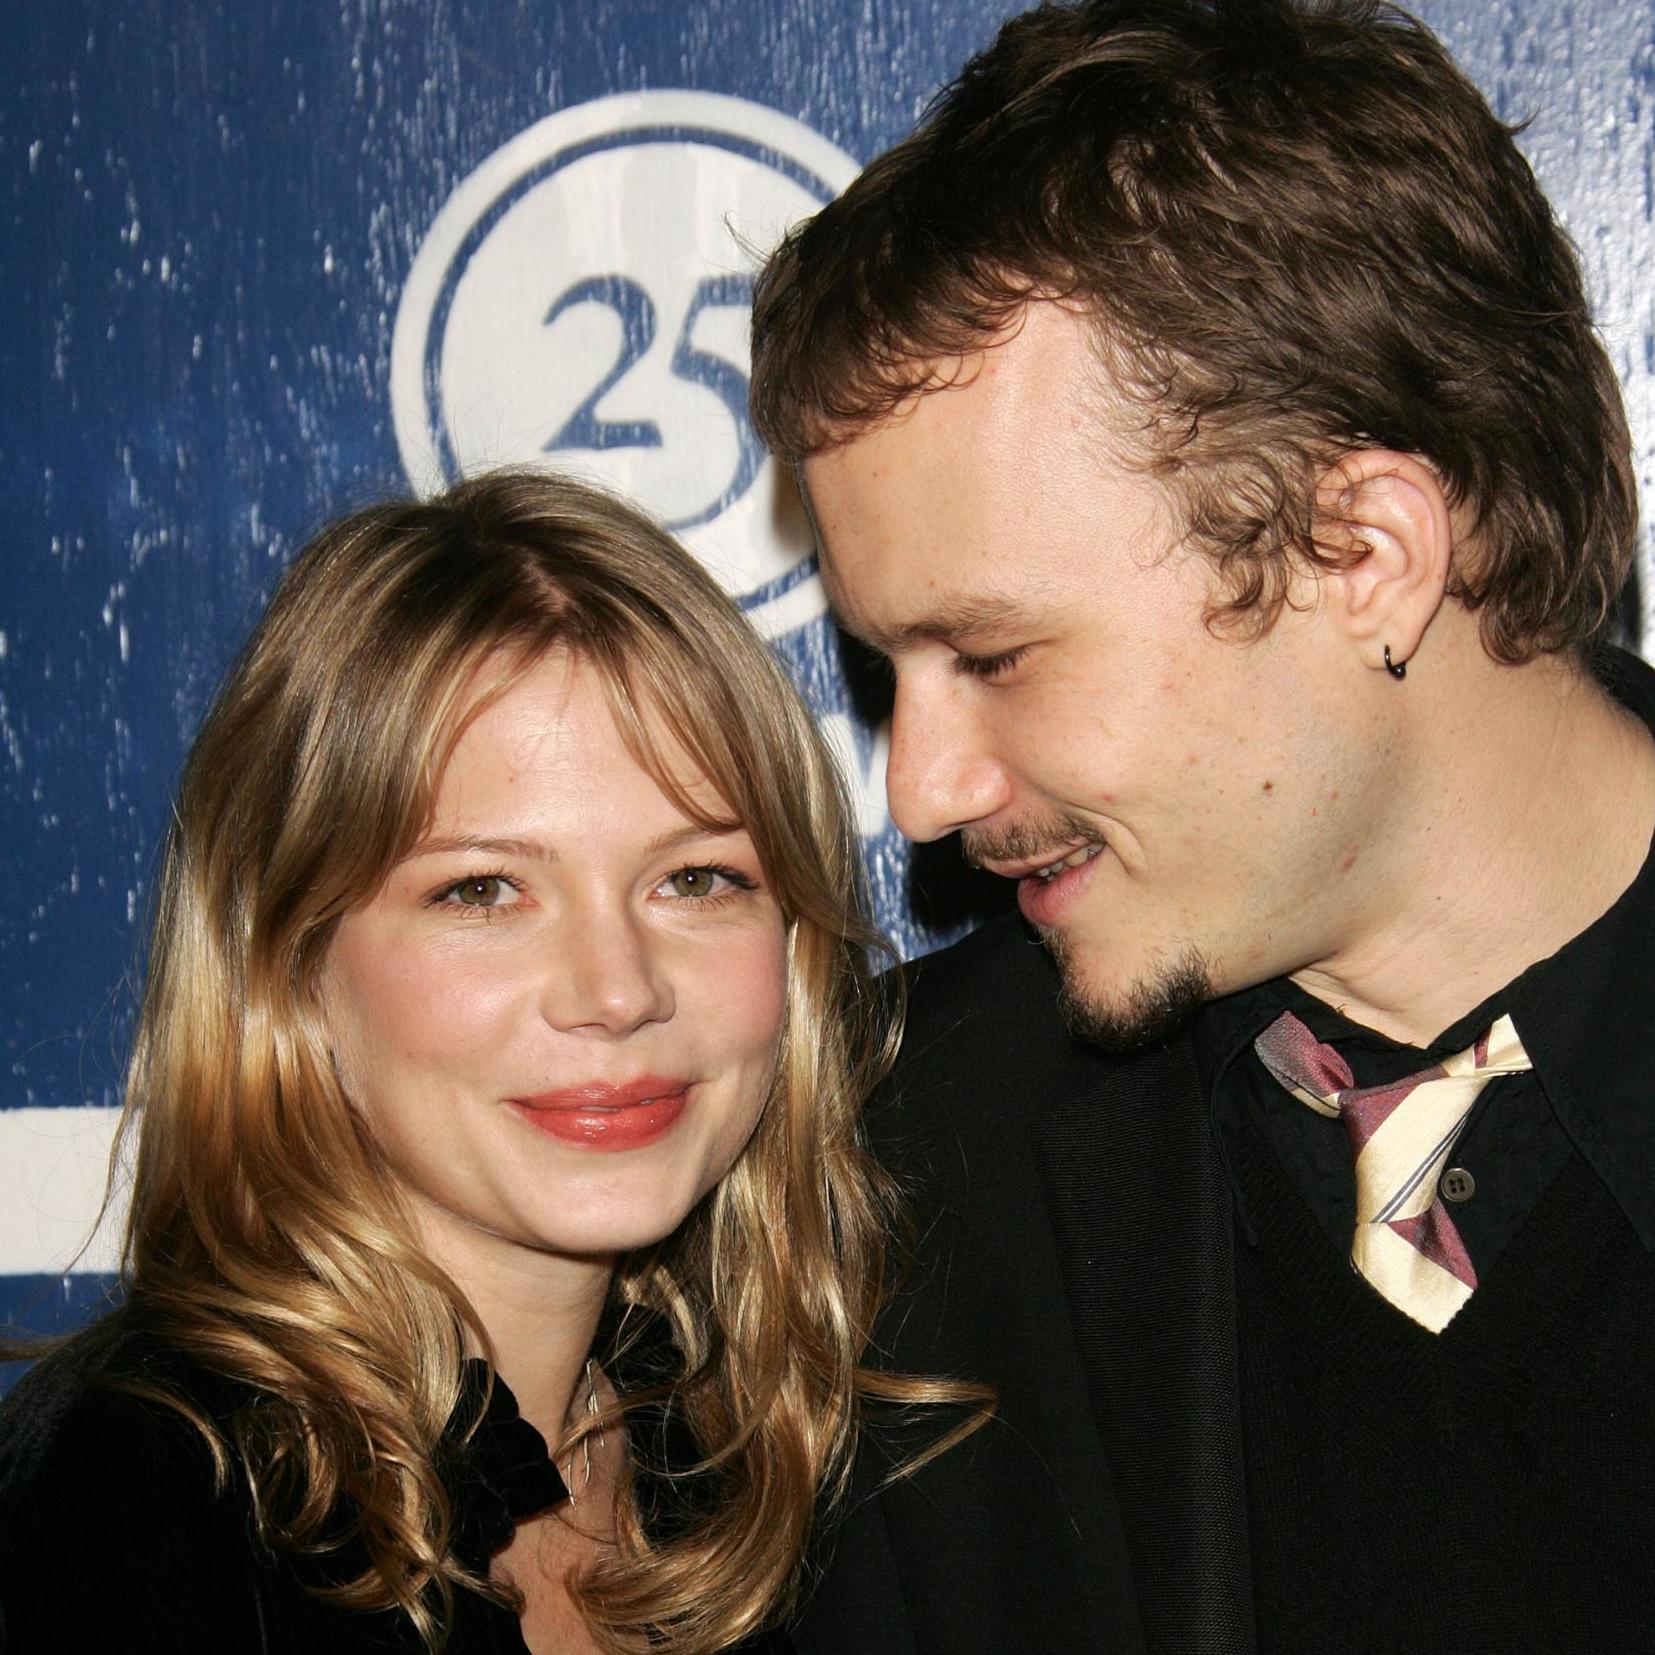 Michelle Williams and Heath Ledger at the Gotham Awards in 2005 (Getty/Evan Agostini)